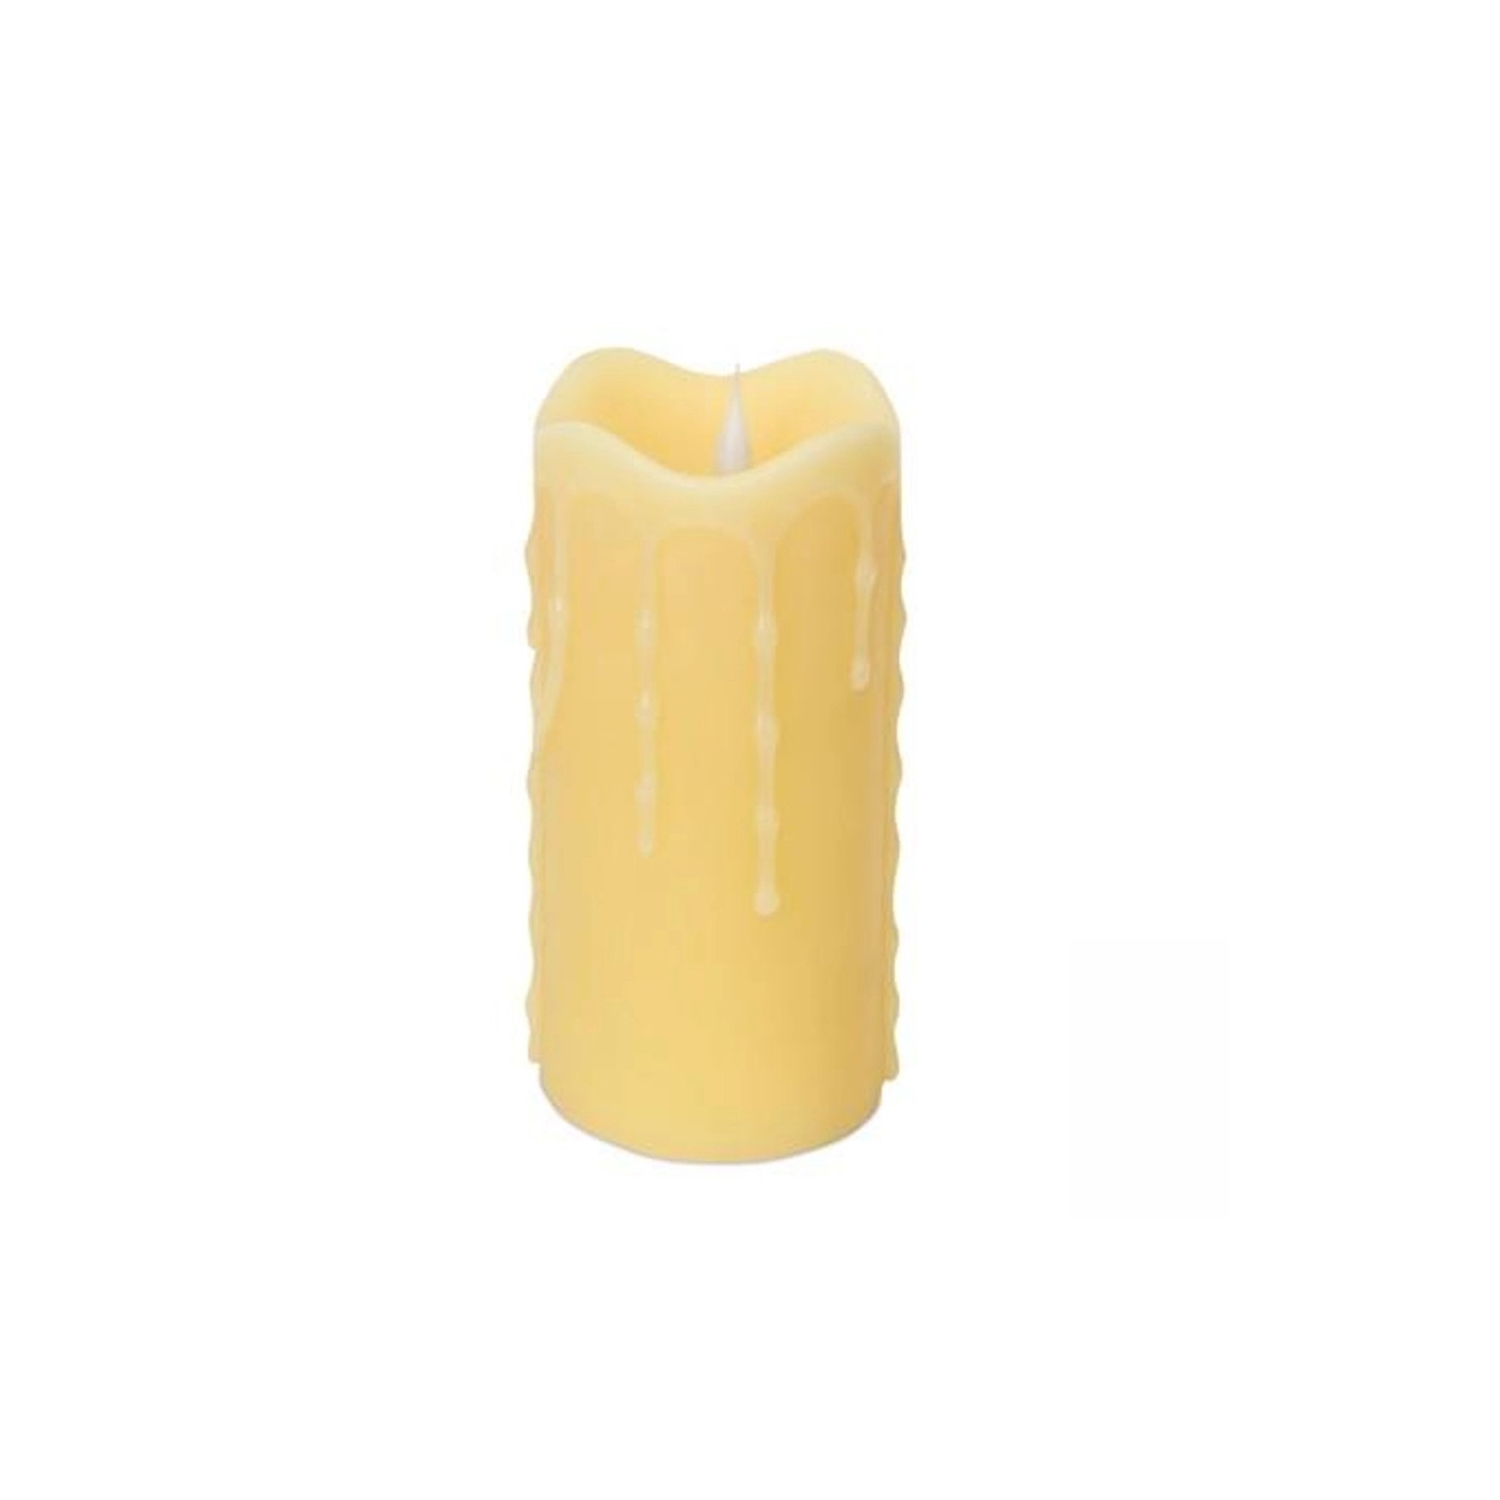 5.25" Simplux Dripping Wax LED Lighted Flameless Candle - Ivory